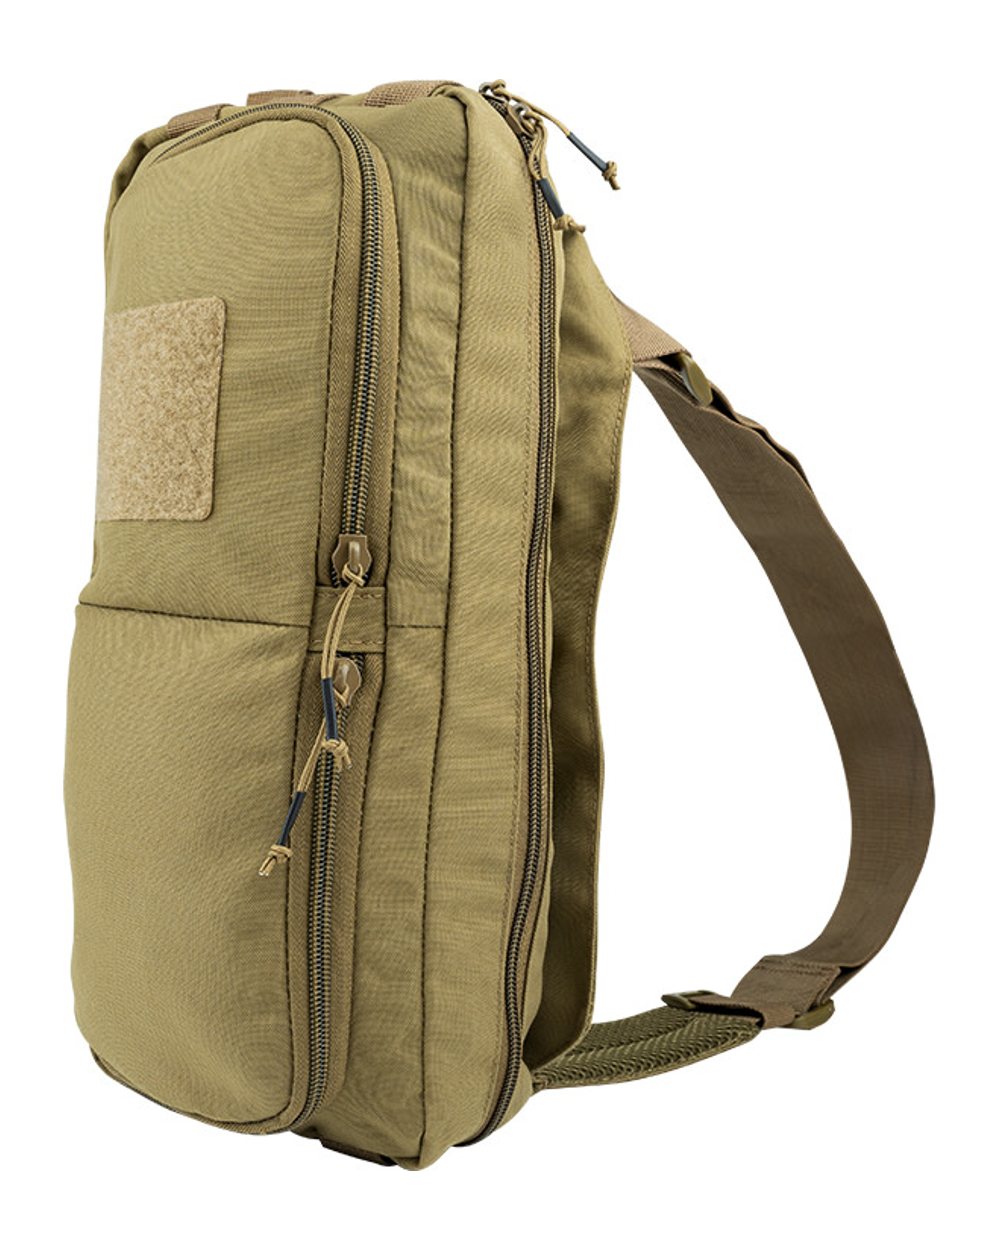 Viper VX Buckle Up Sling Pack in Coyote 